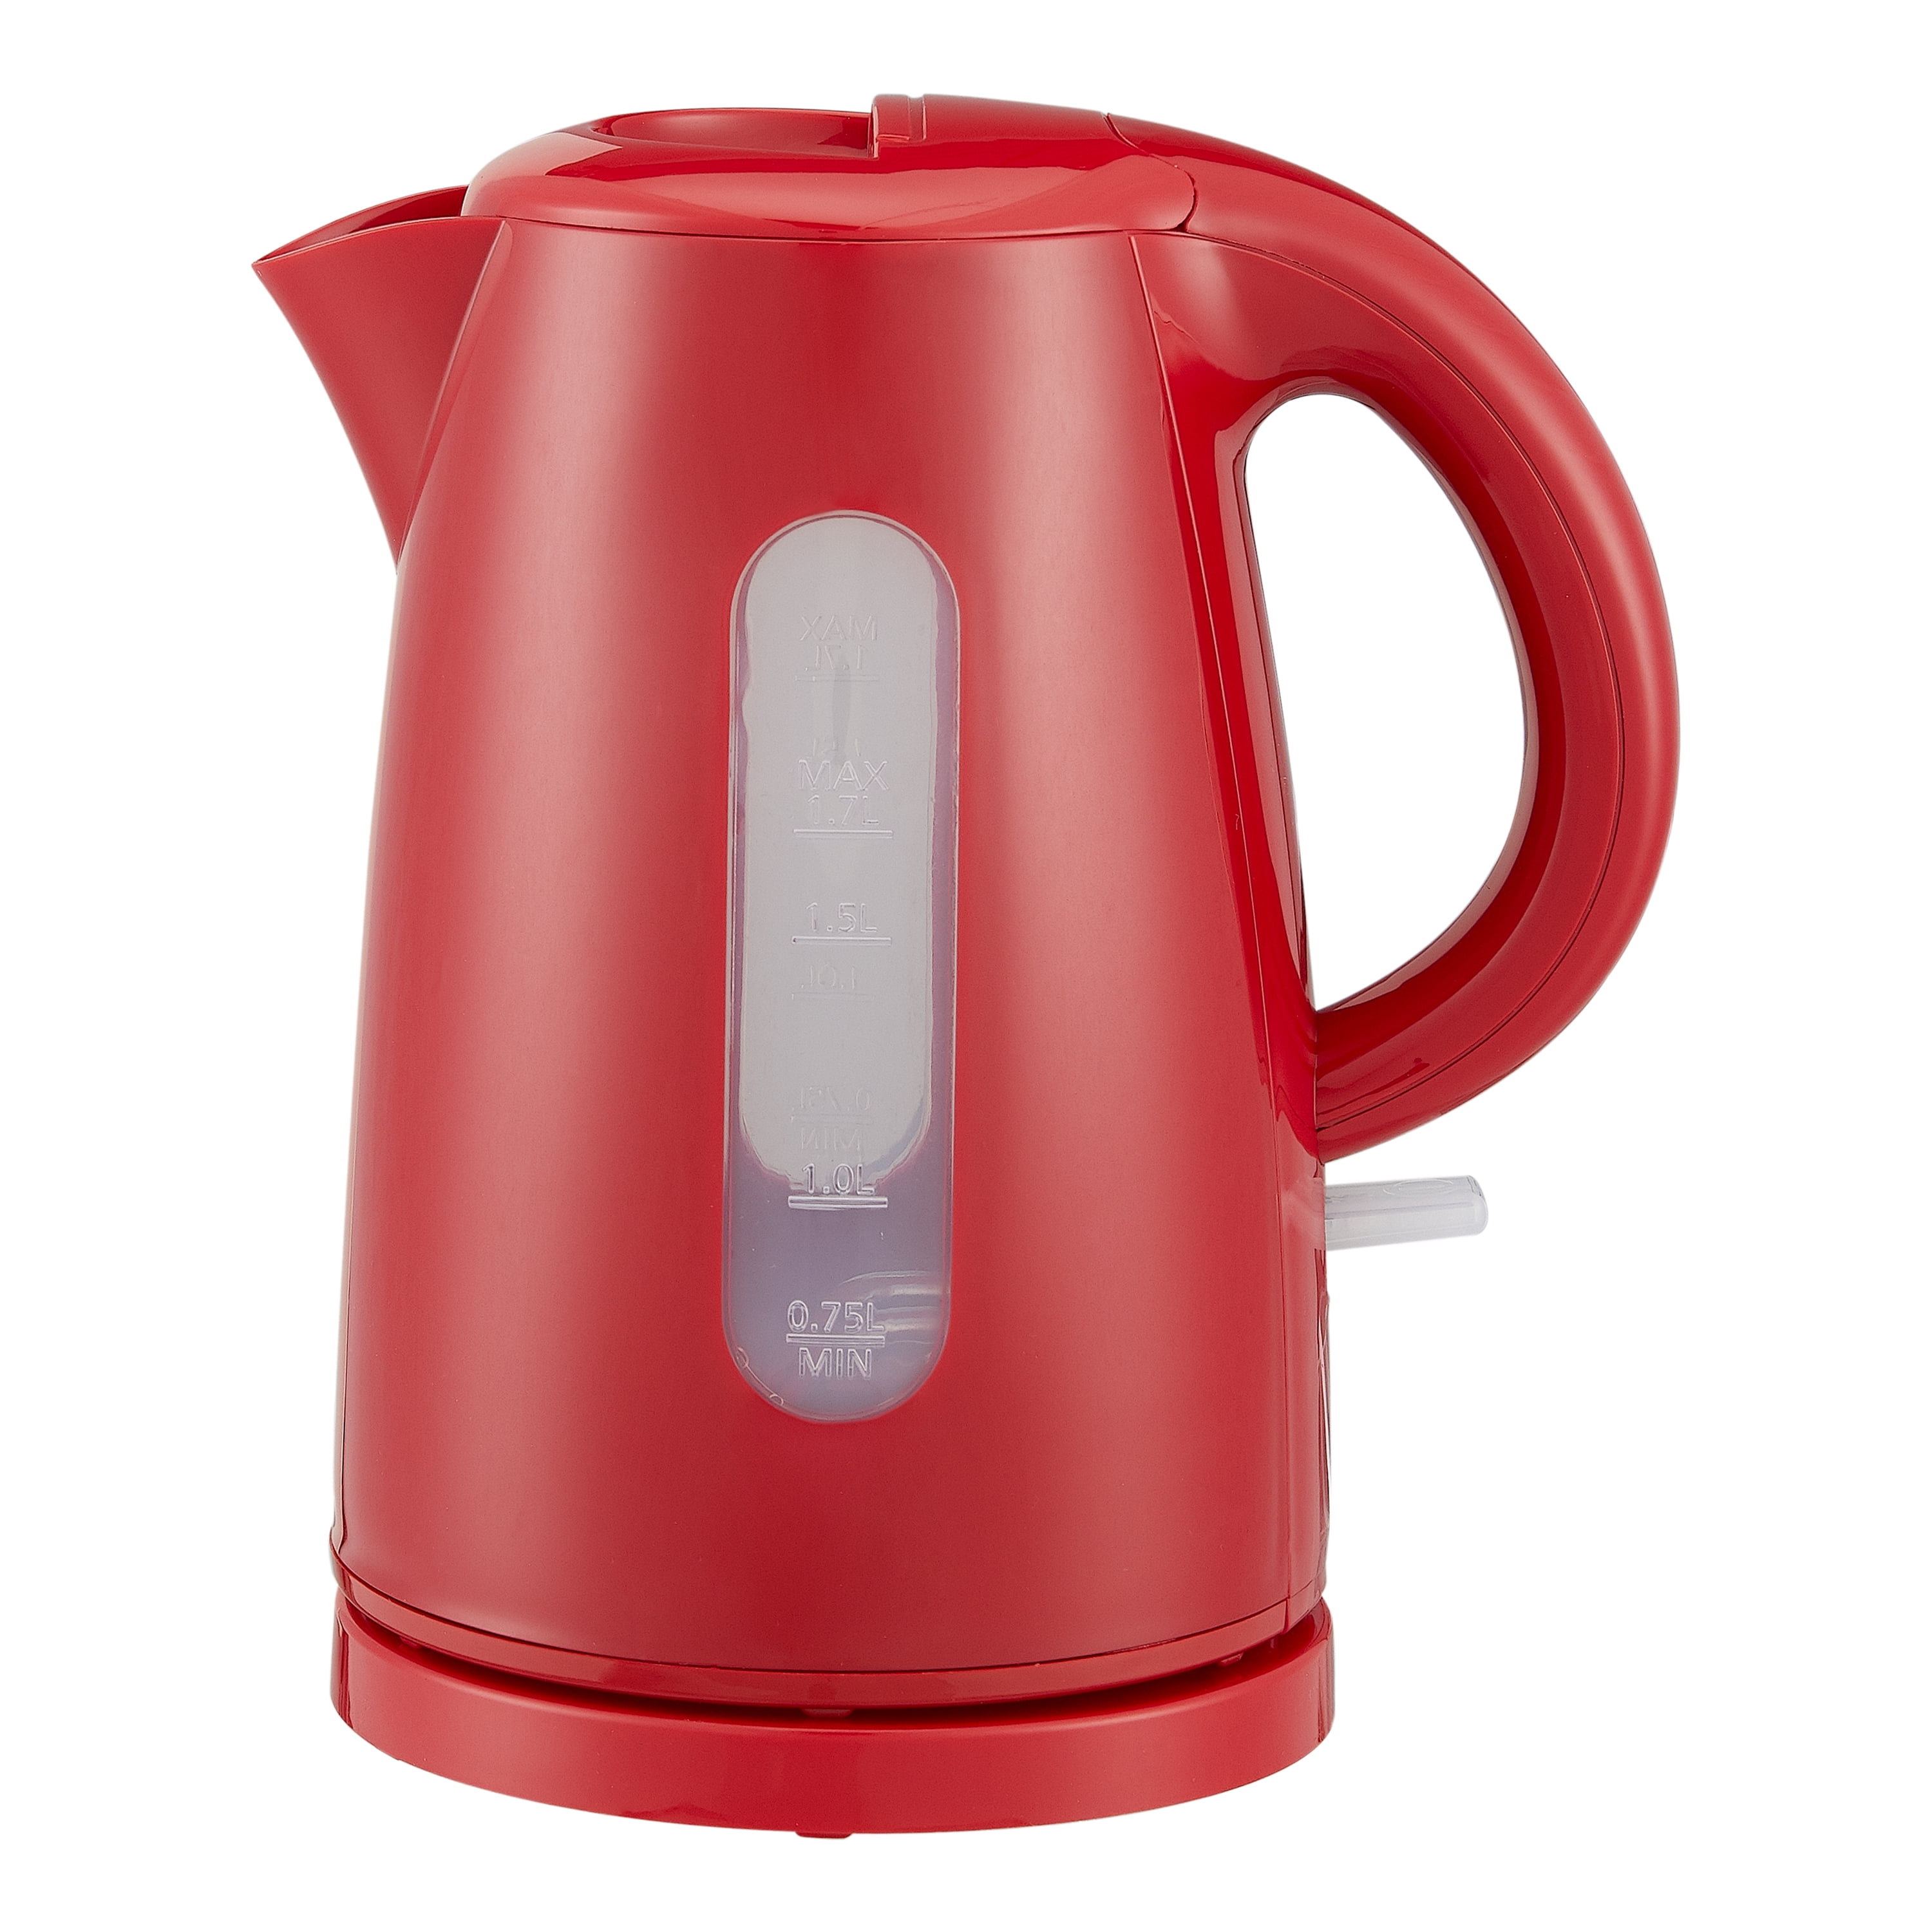 Mainstays 1.7Liter Plastic Electric Kettle, Red Fruit